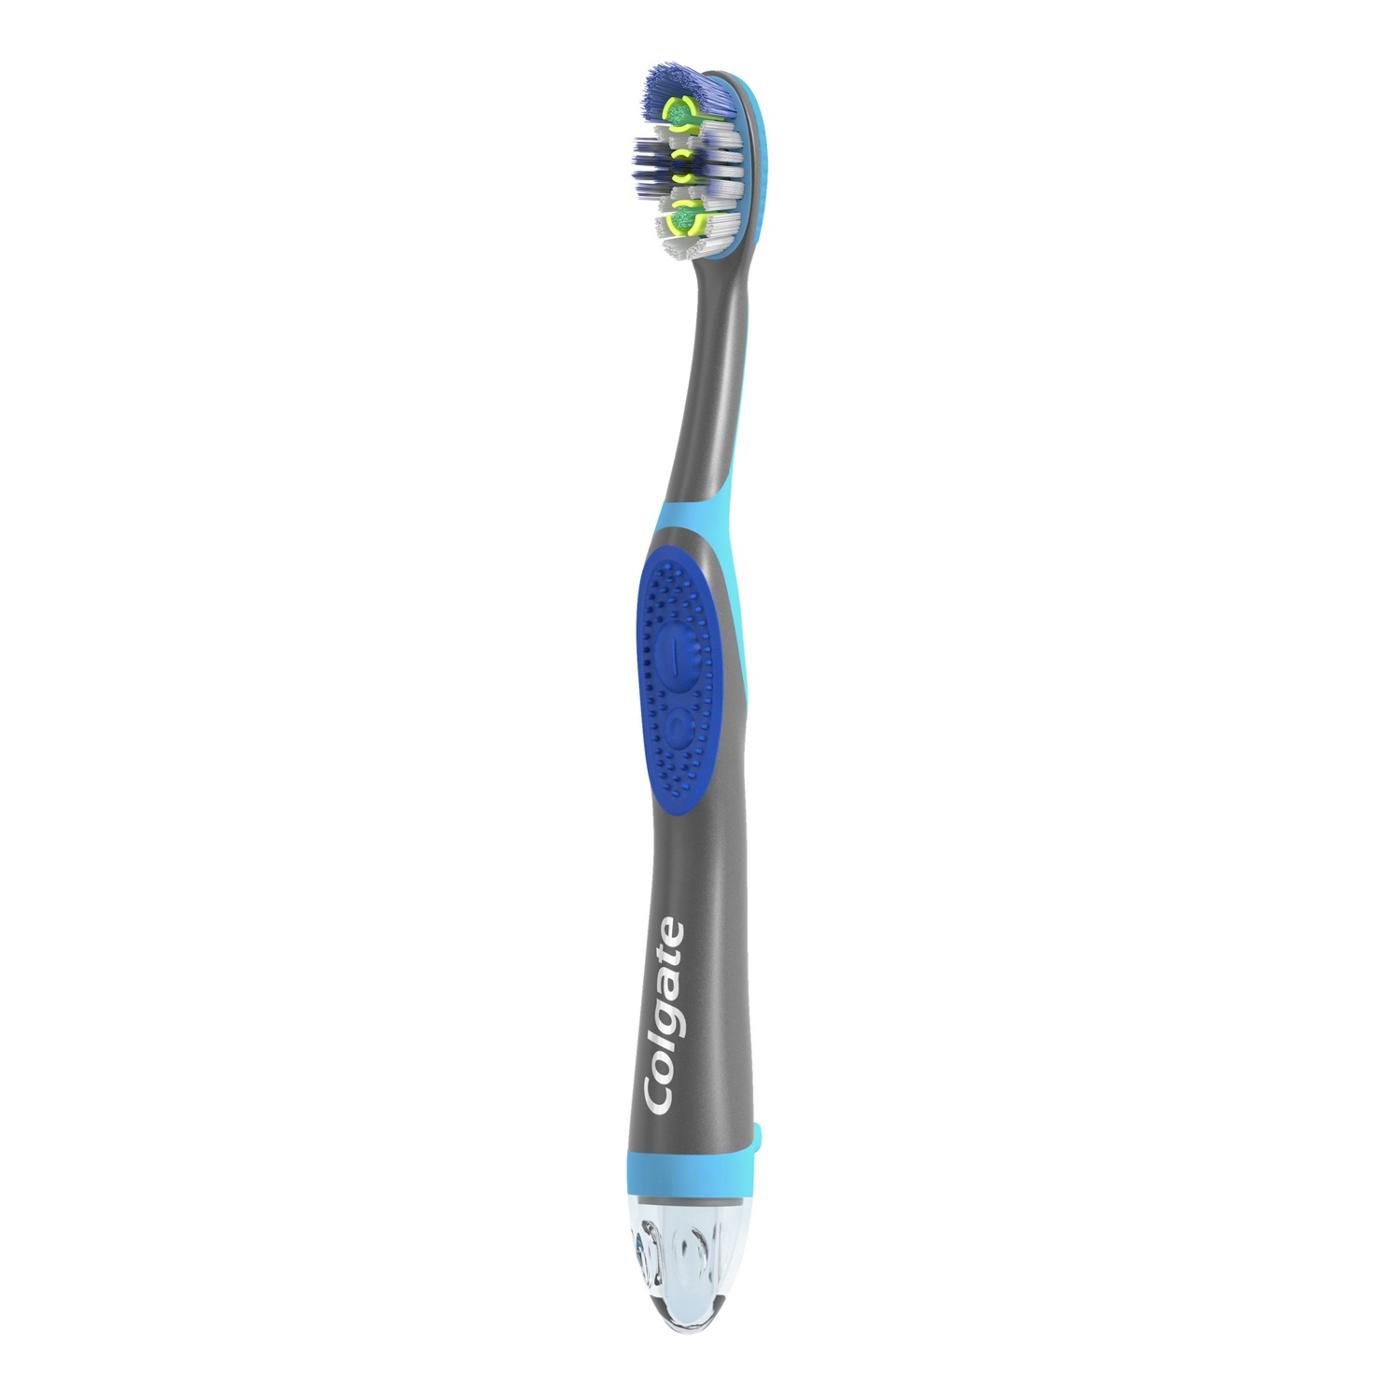 Colgate 360 Floss -Tip Sonic Powered Toothbrush - Soft; image 10 of 10